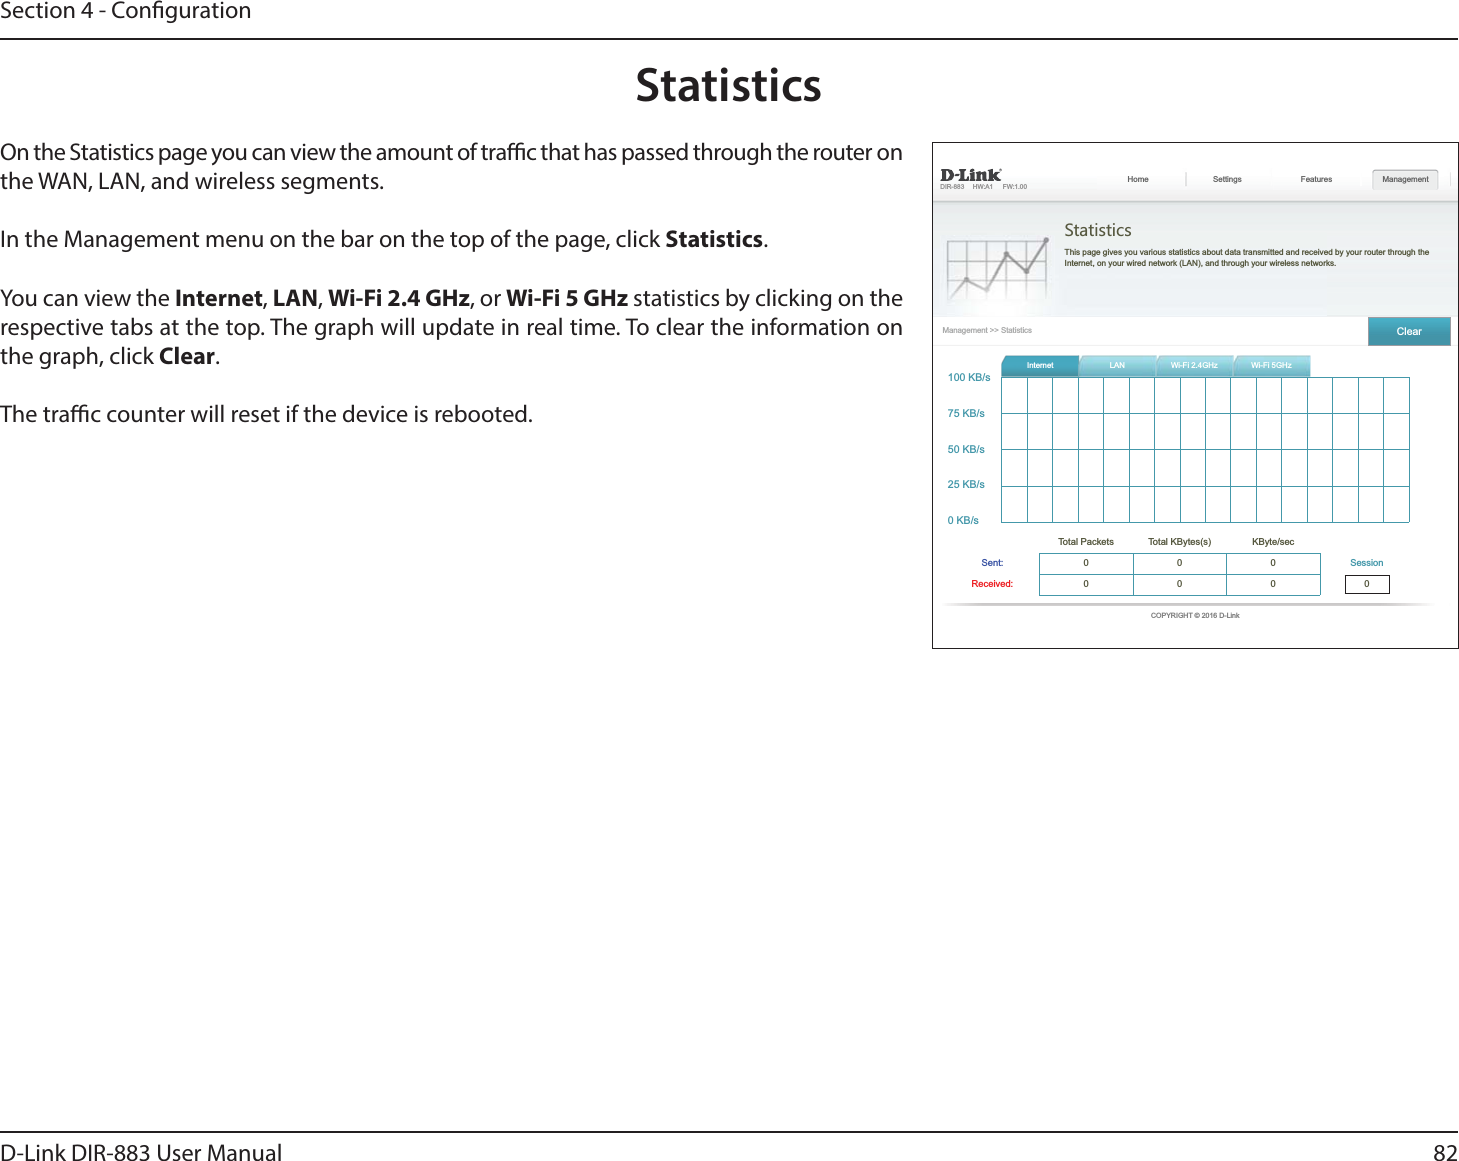 82D-Link DIR-883 User ManualSection 4 - Conguration  StatisticsThis page gives you various statistics about data transmitted and received by your router through the  Features Management ClearInternet      000 0000StatisticsOn the Statistics page you can view the amount of trac that has passed through the router on the WAN, LAN, and wireless segments.In the Management menu on the bar on the top of the page, click Statistics.You can view the Internet, LAN, Wi-Fi 2.4 GHz, or Wi-Fi 5 GHz statistics by clicking on the respective tabs at the top. The graph will update in real time. To clear the information on the graph, click Clear.The trac counter will reset if the device is rebooted.